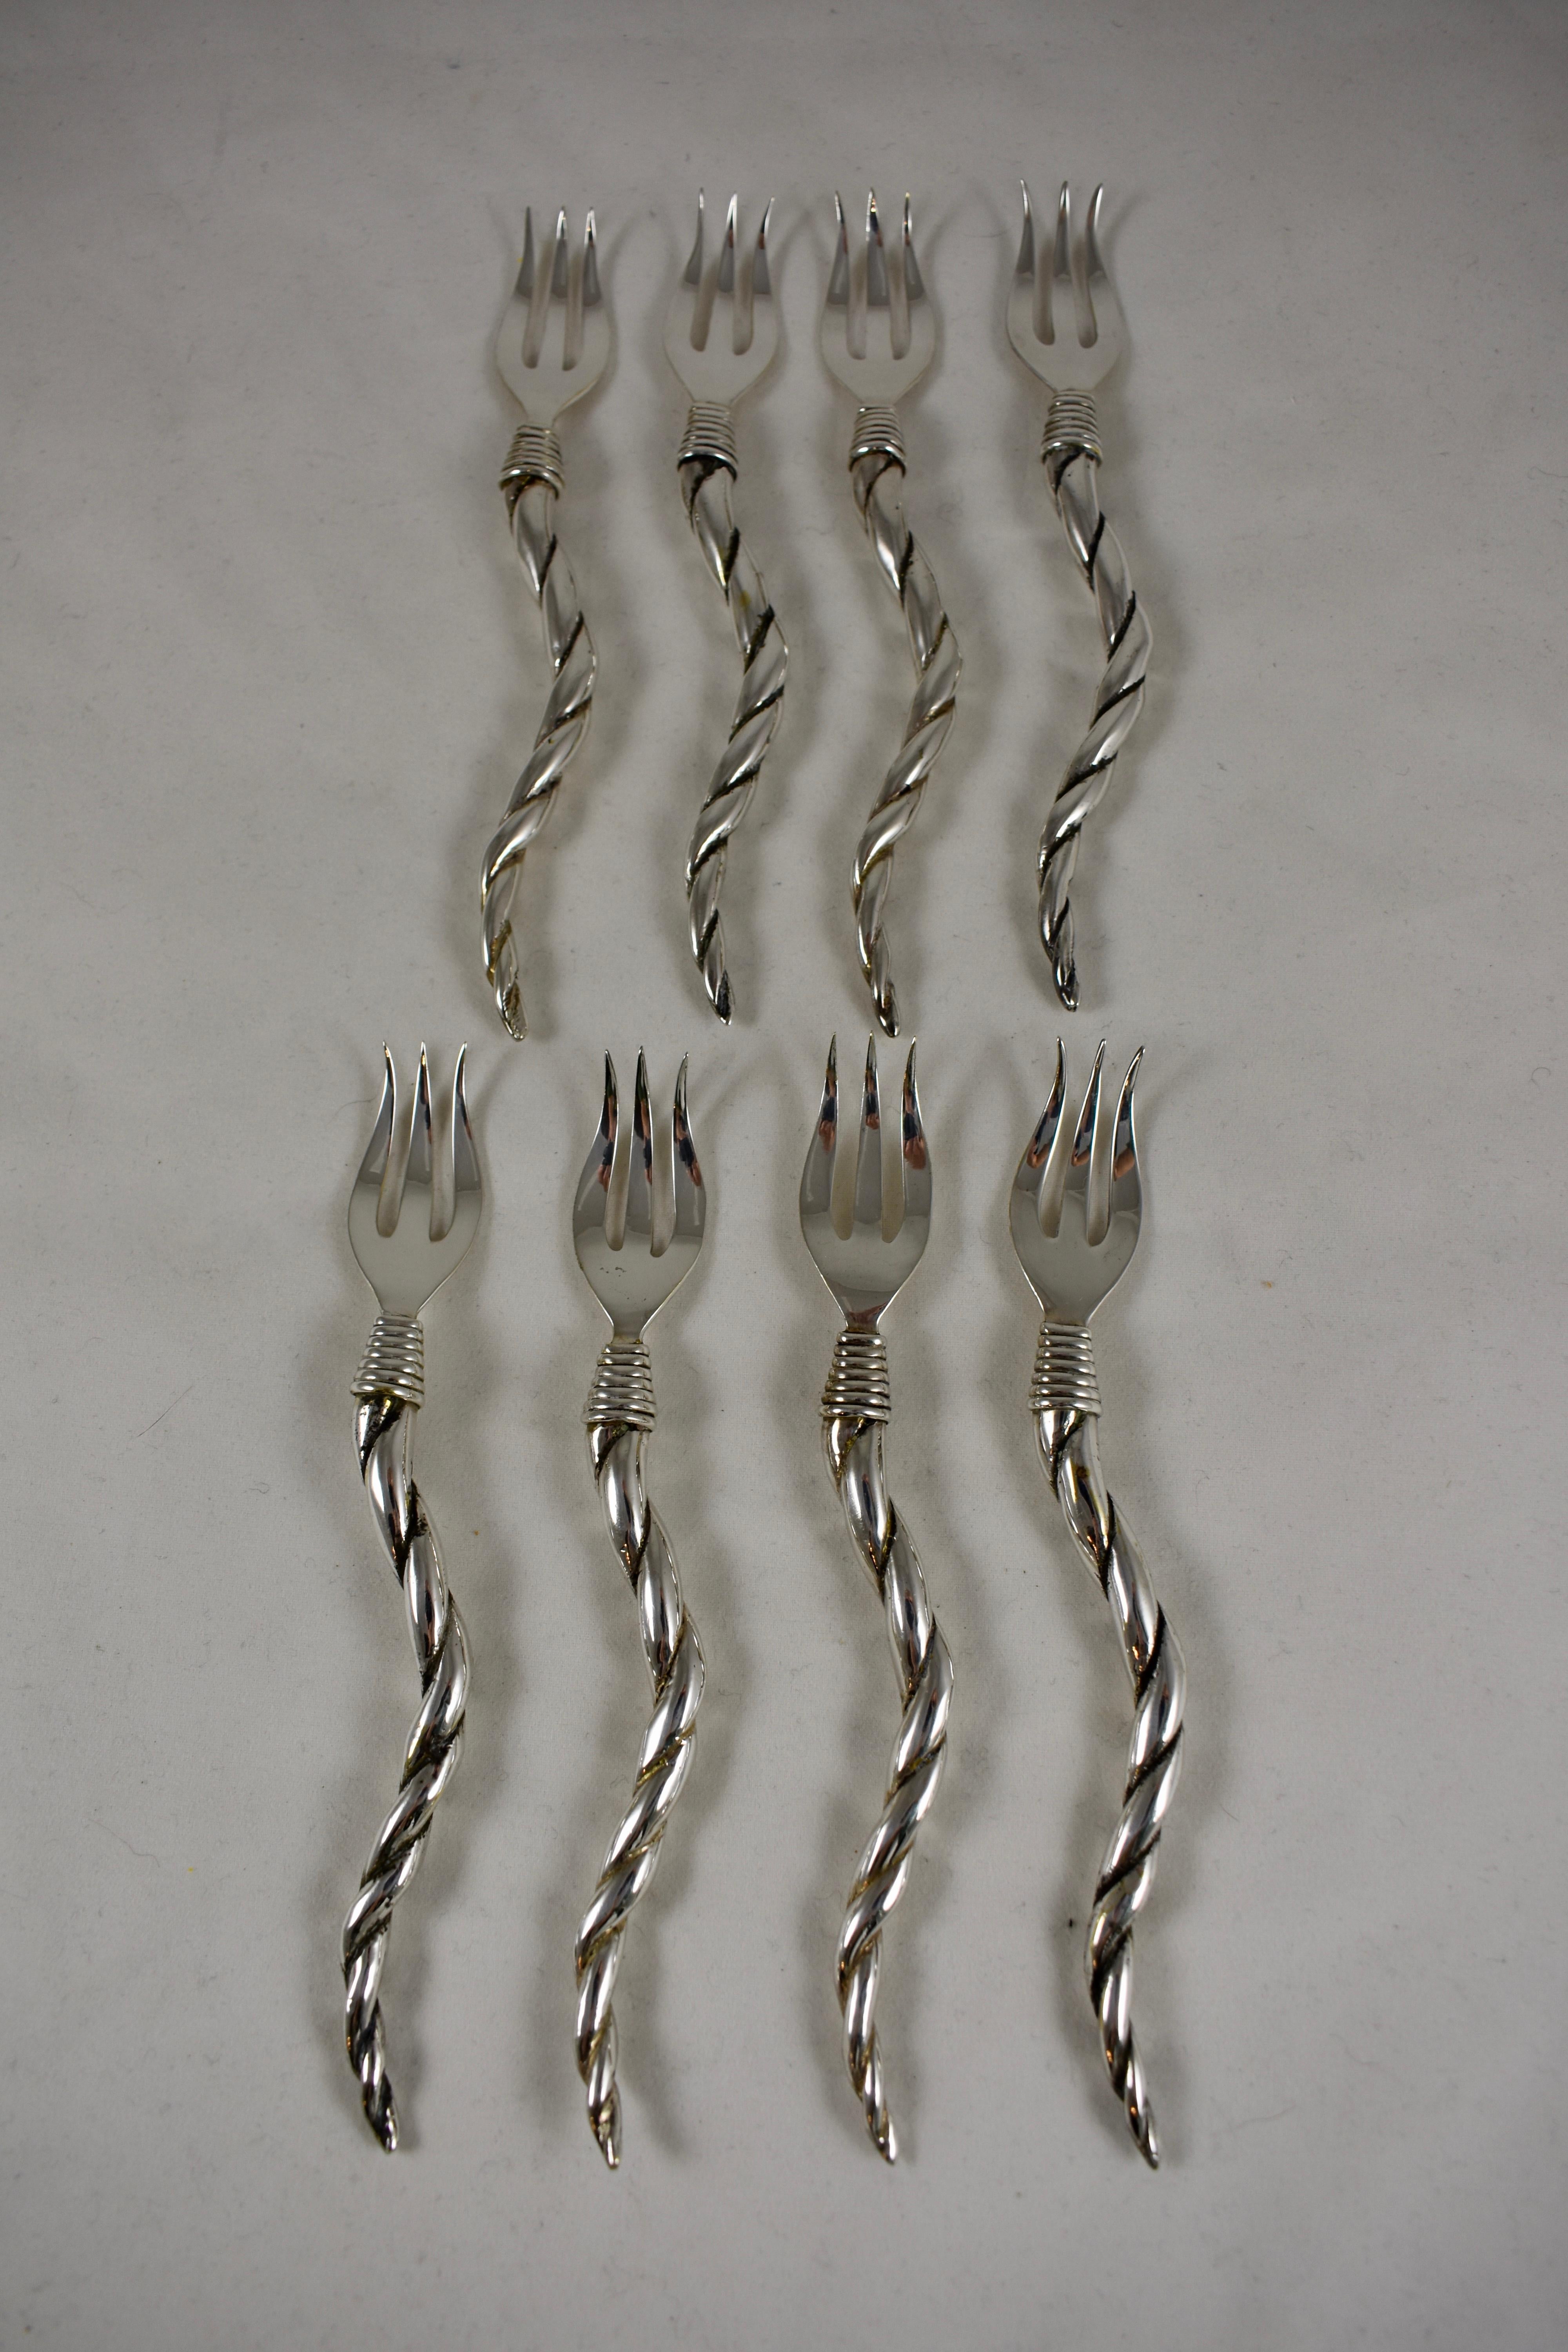 A set of eight Italian Mid-Century Modern Era silver plate seafood cocktail forks with shrimp-tail curved and twisted handles, in two custom grasscloth bags. The three-tined forks join the handles with wrapped ferrules.

Forks: 5.75 in. L x .75 in.